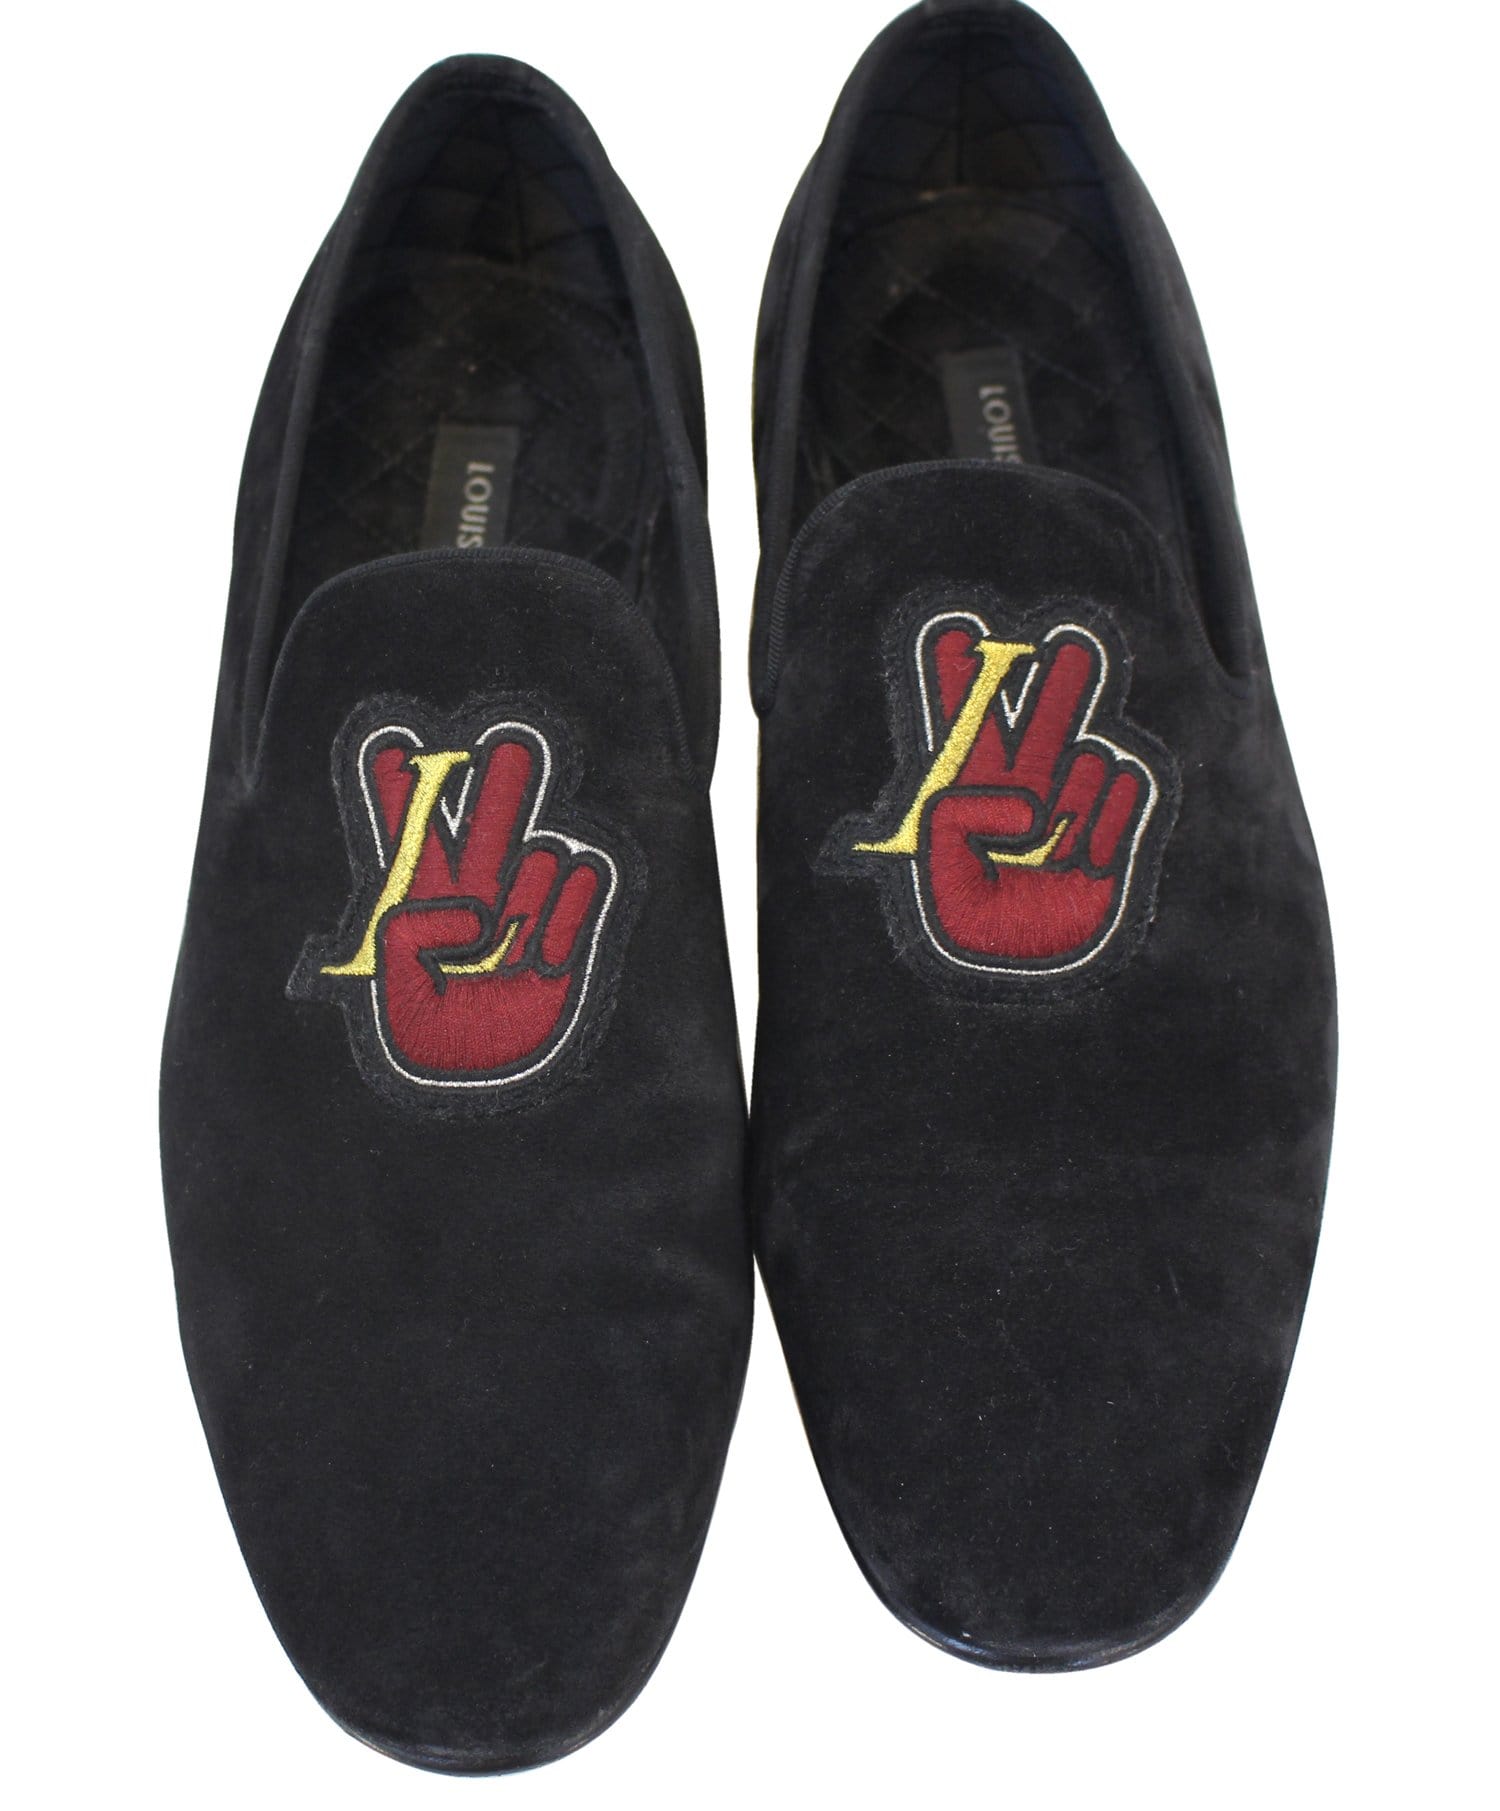 louis-vuitton mens loafers